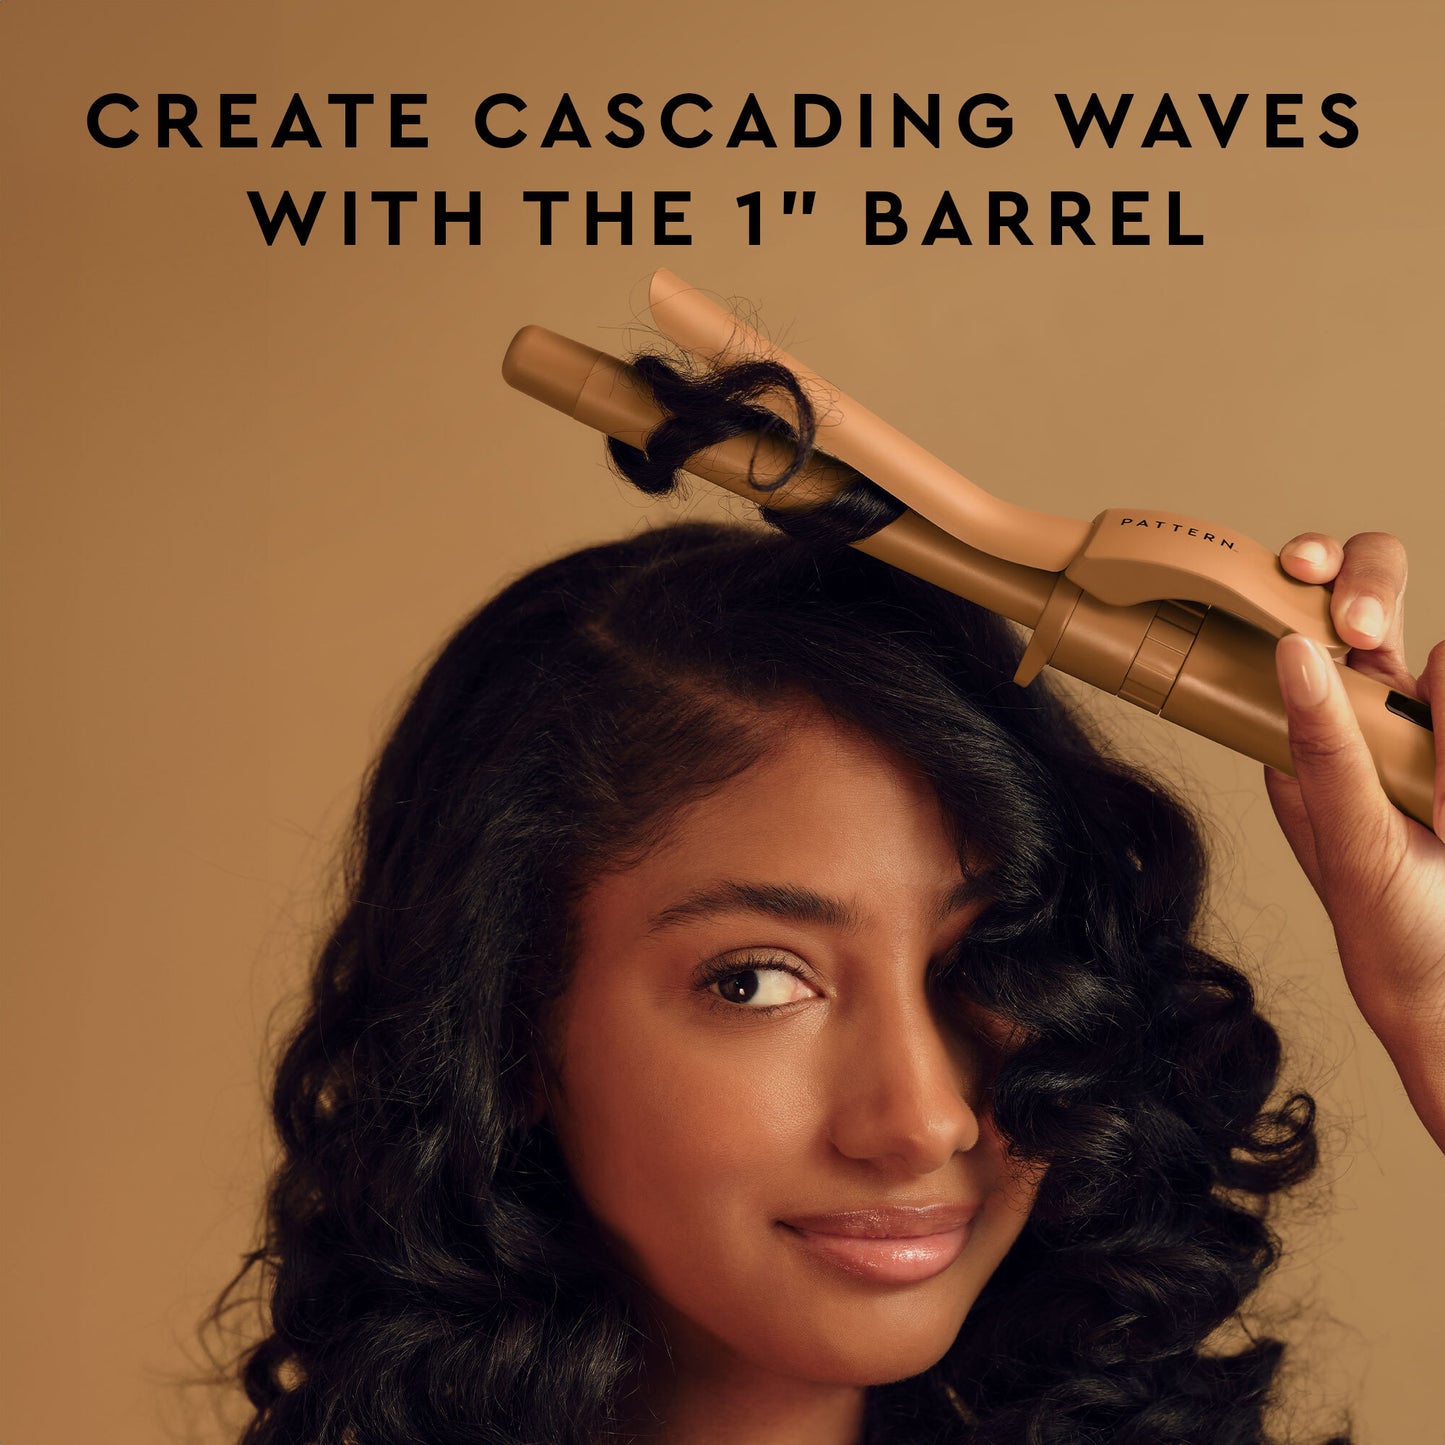 The Curling Iron & More Bundle